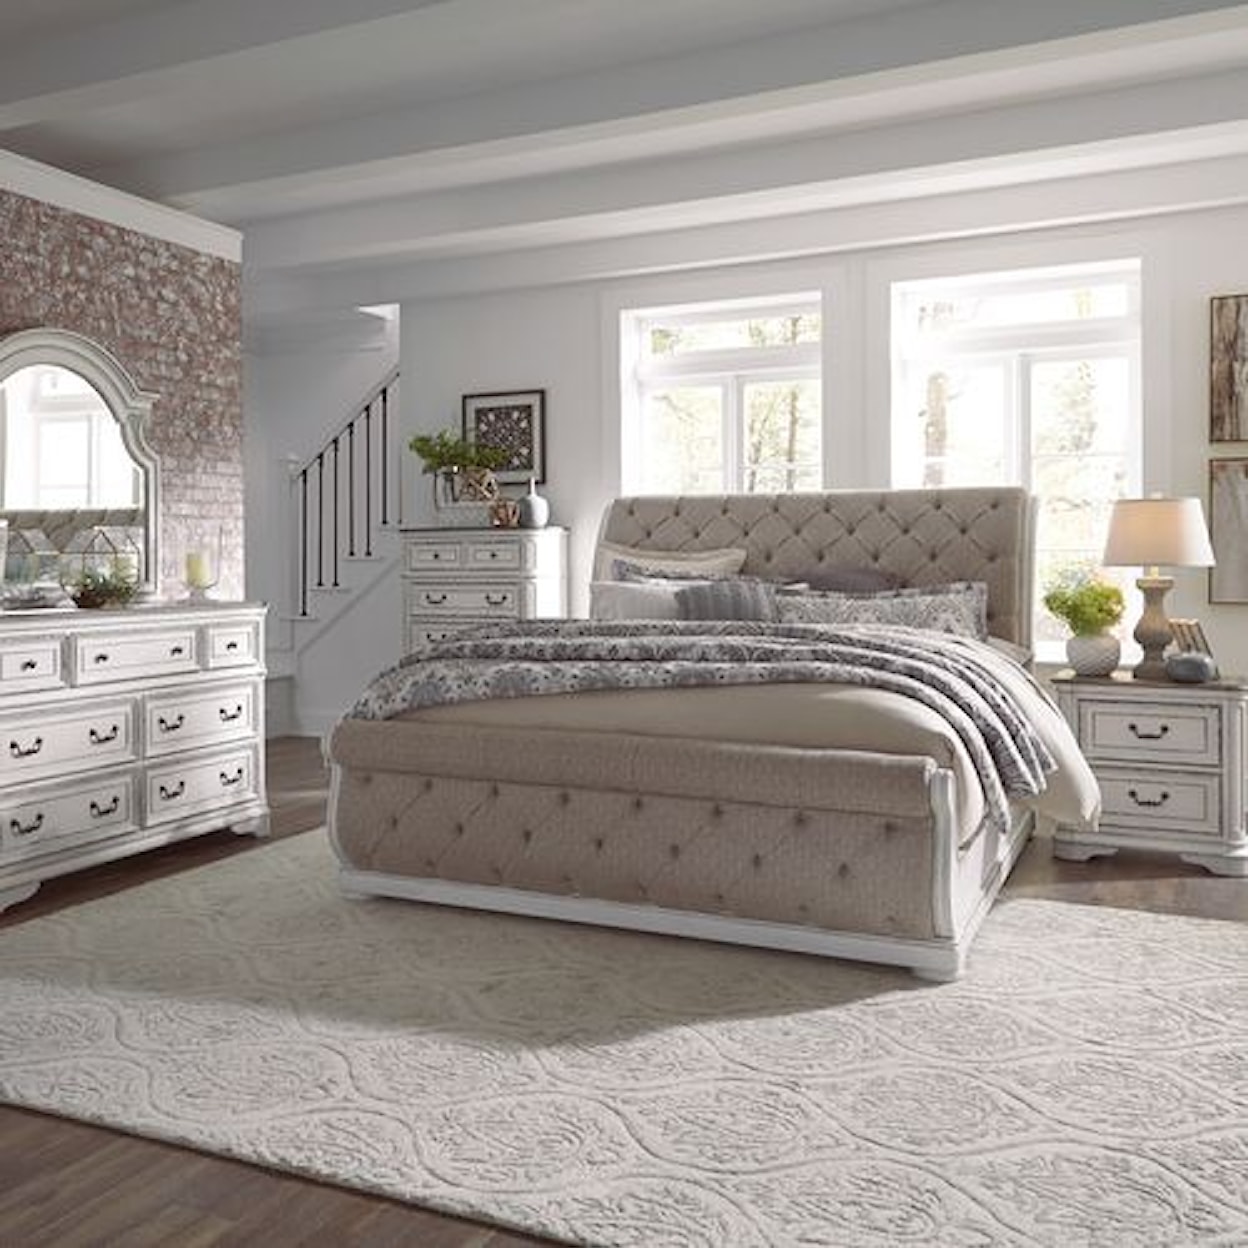 Liberty Furniture Magnolia Manor California King Upholstered Sleigh Bed